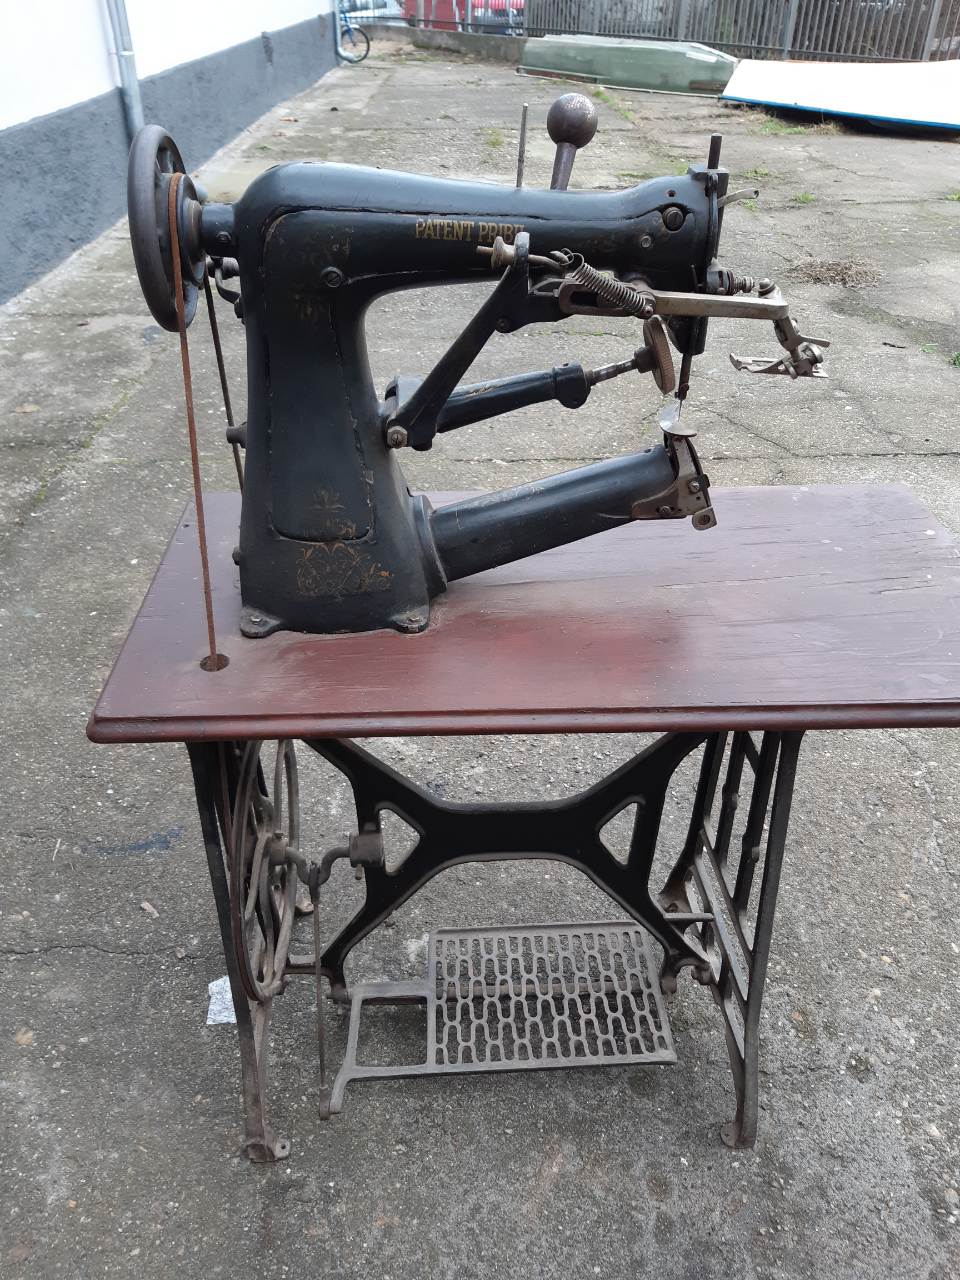 TYPES OF MILLINERY STRAW BRAID SEWING MACHINES - Learn How To Make